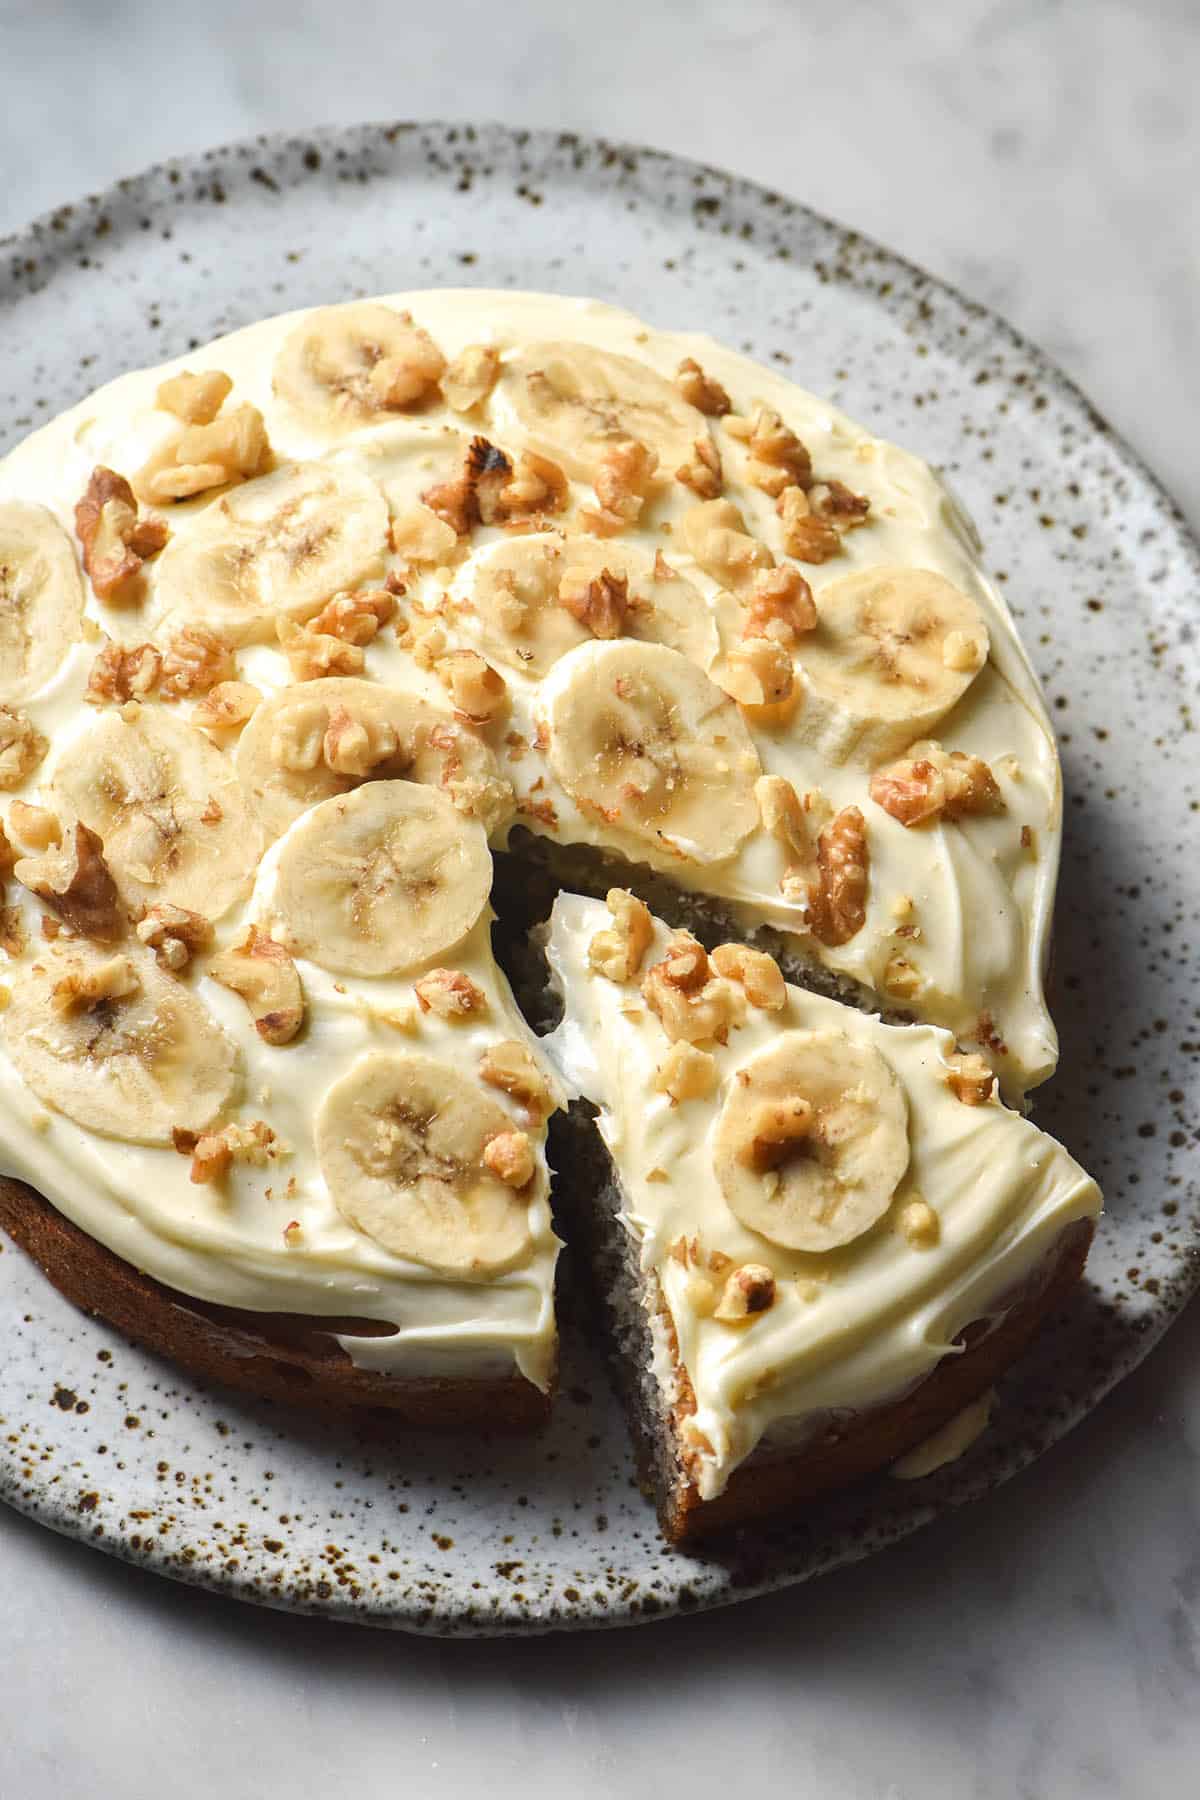 An aerial view of a gluten free banana cake on a white speckled plate atop a white marble table. The banana cake is topped with cream cheese icing, sliced bananas and crushed walnuts